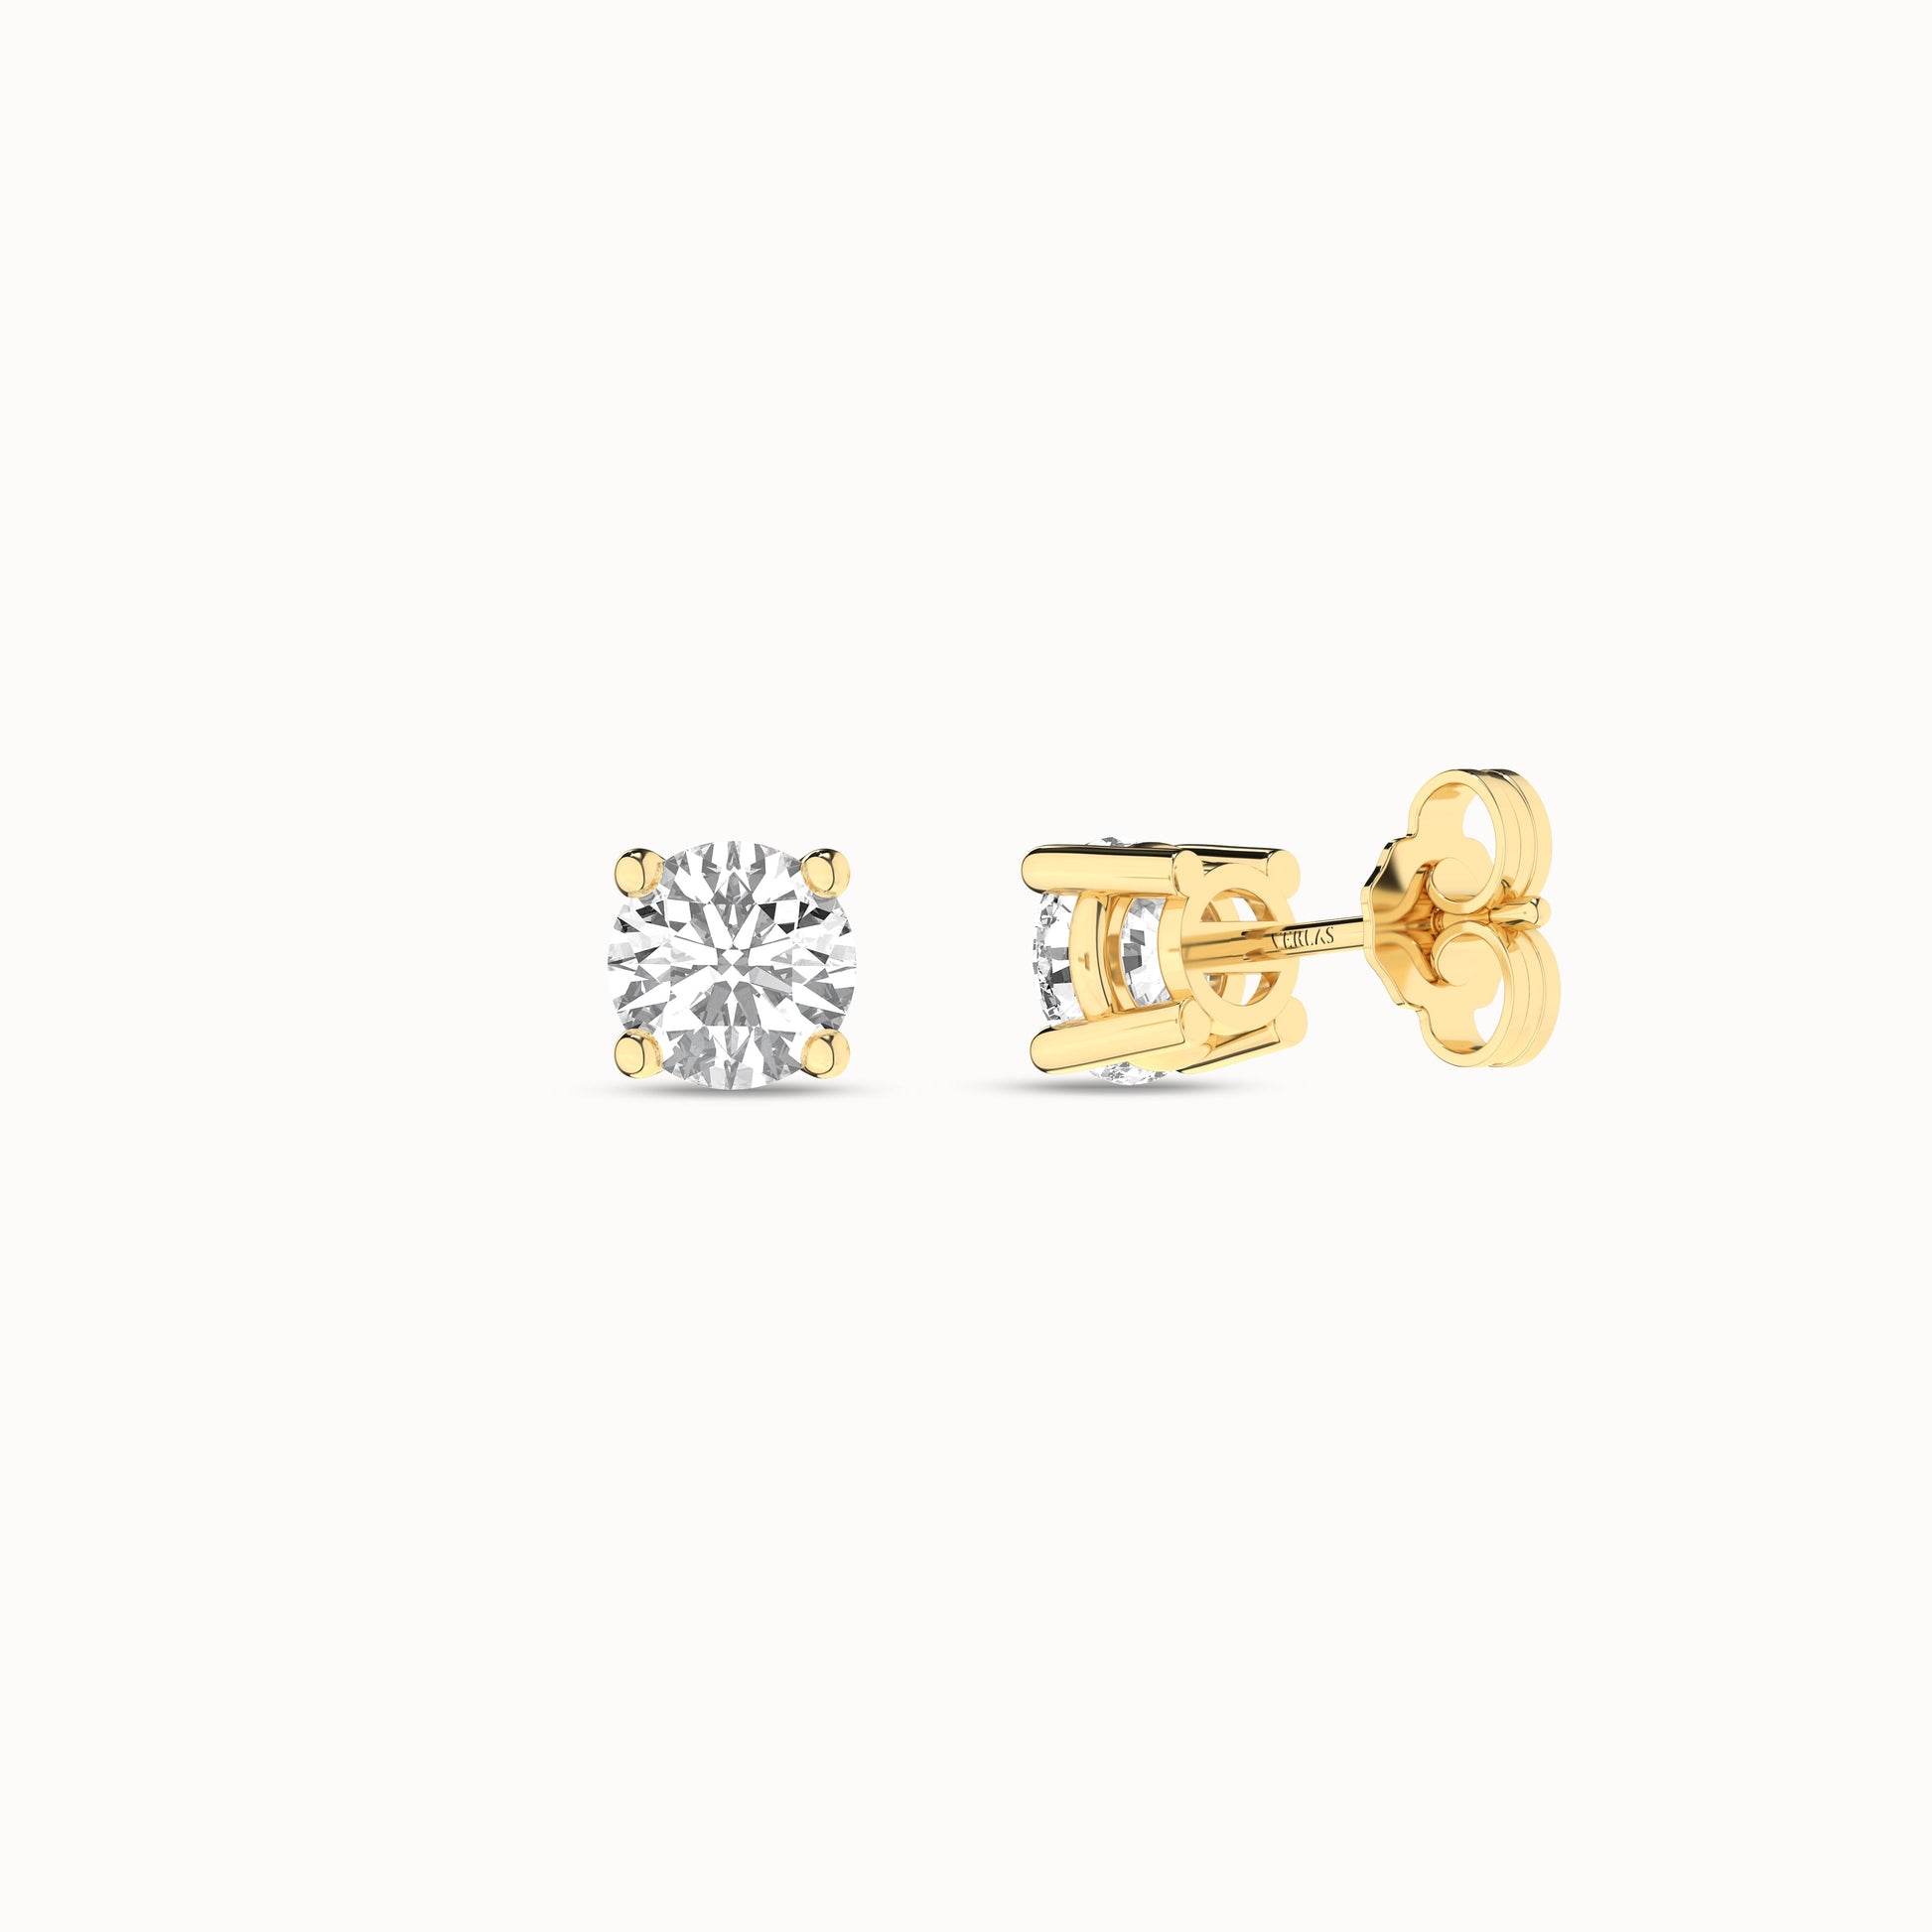 Round Solitaire Studs_Product Angle_1Ct. - 3